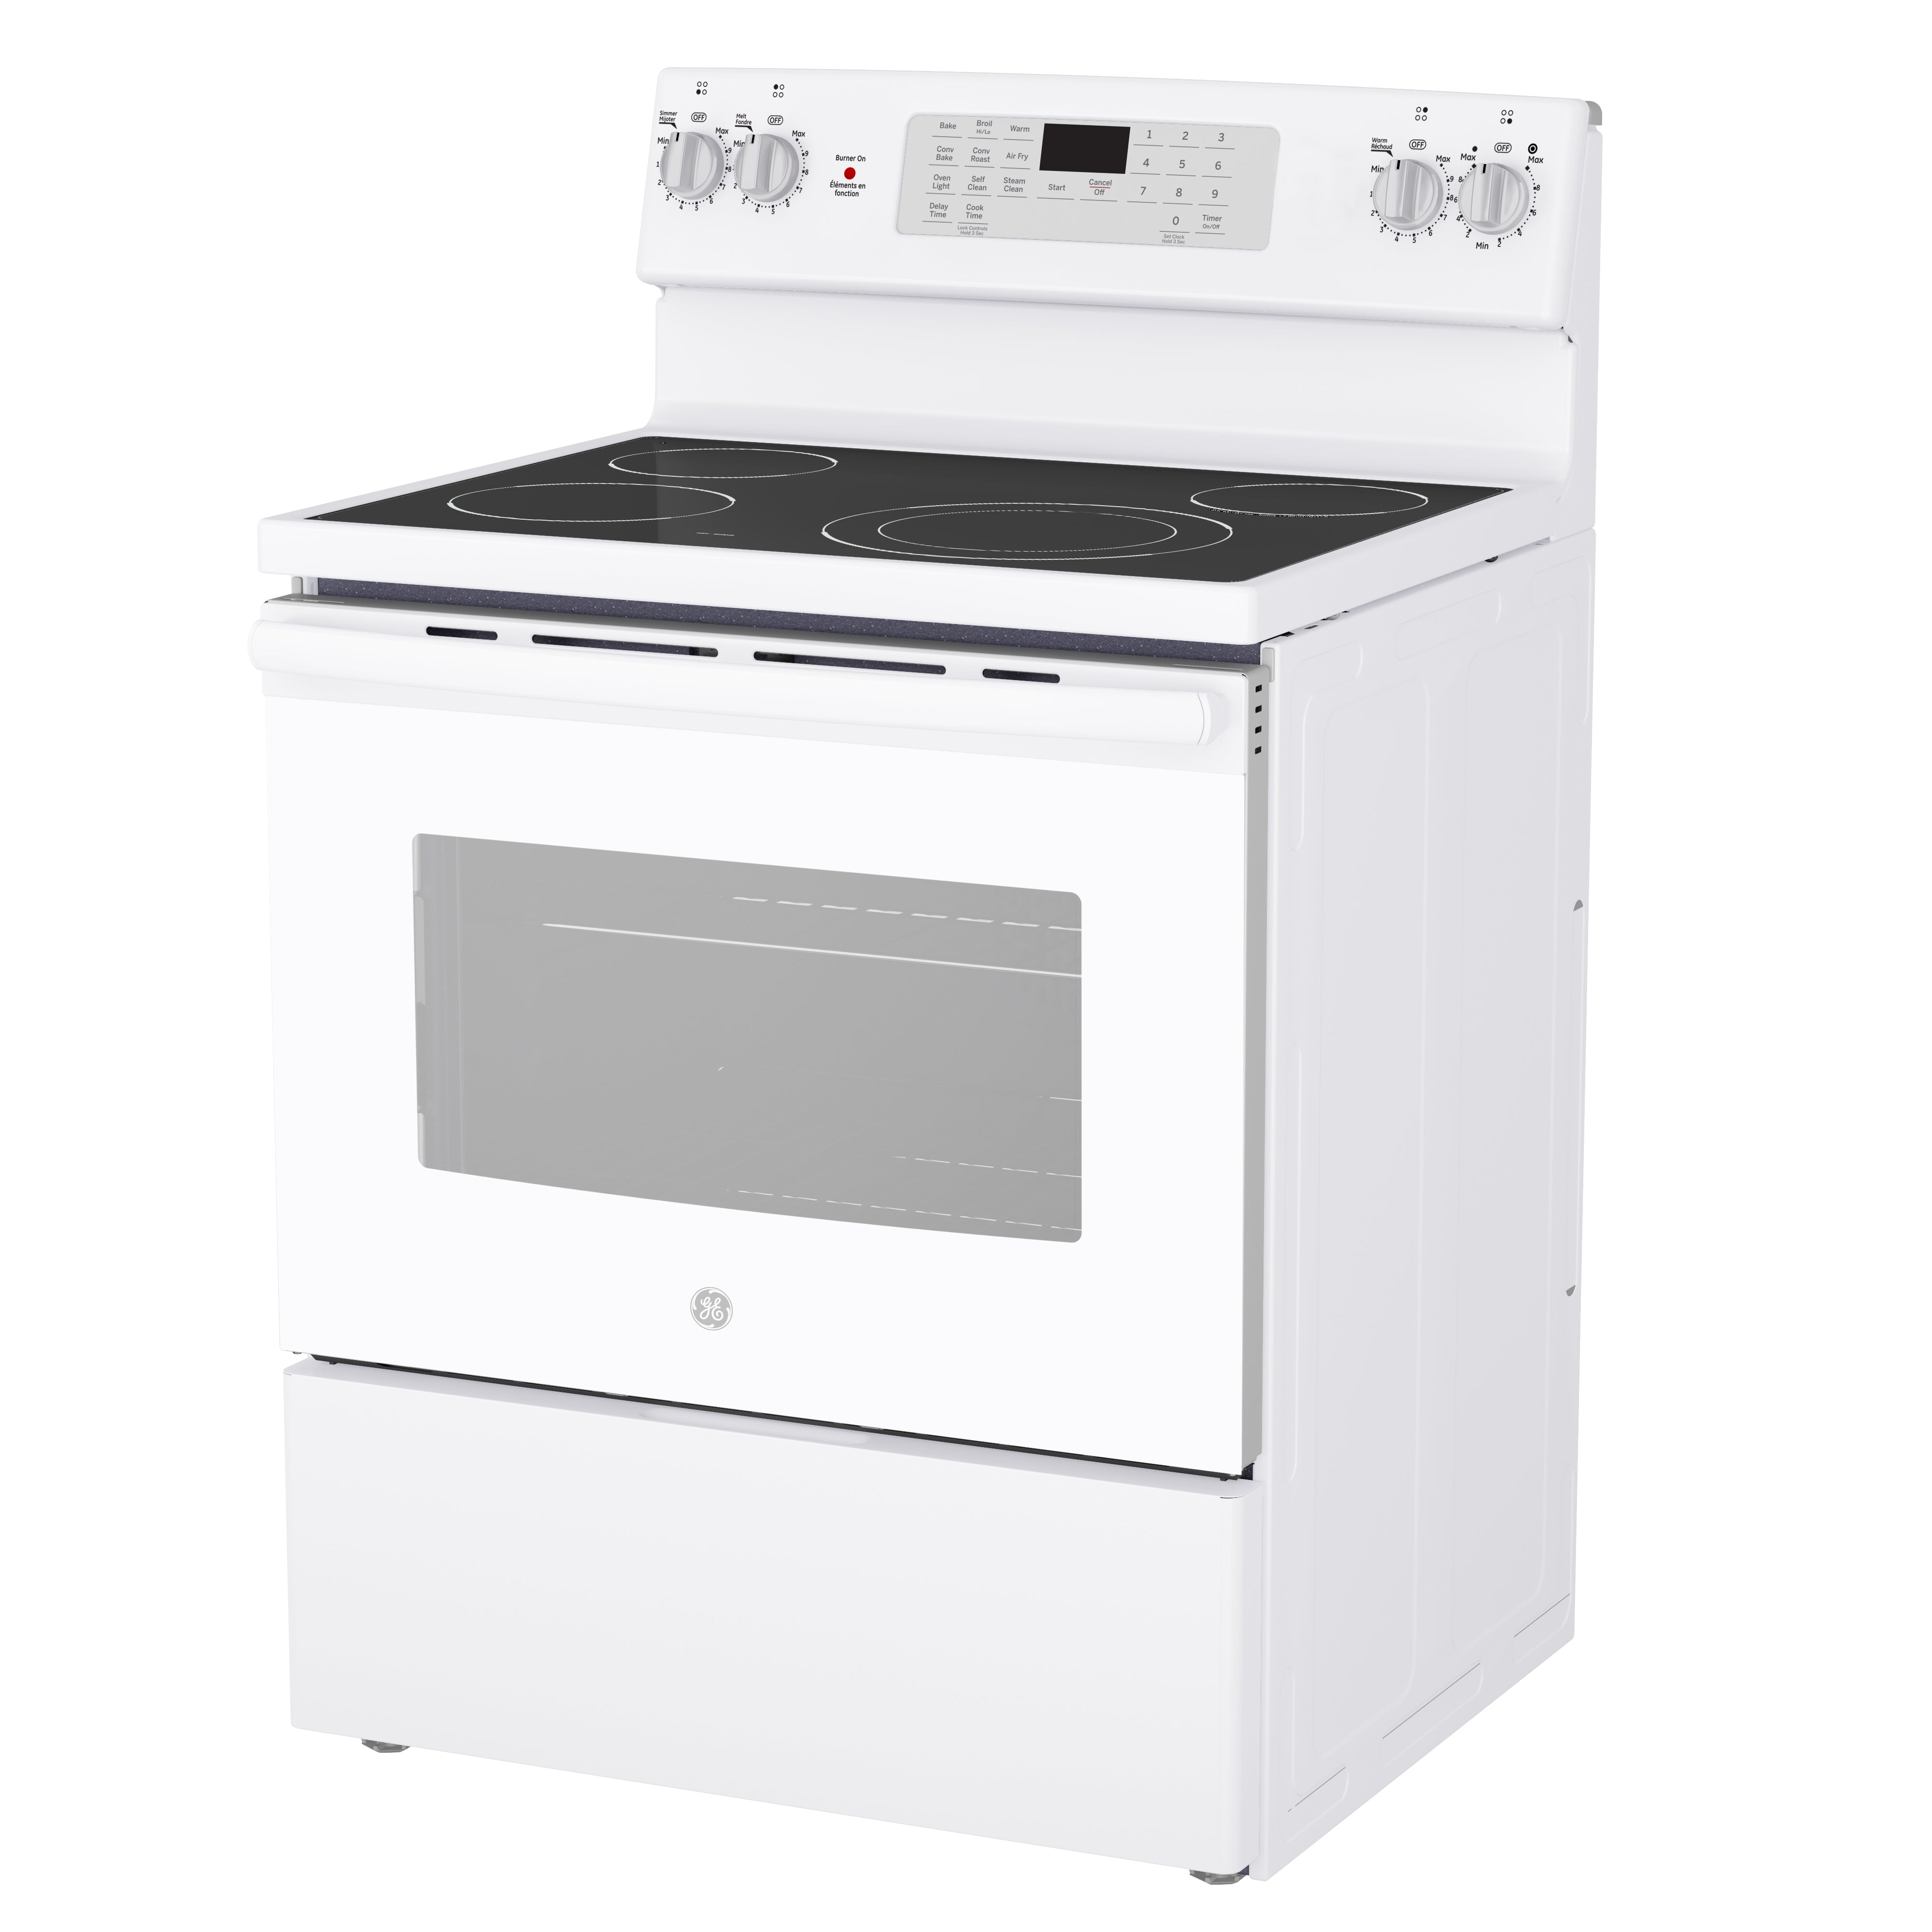 GE - 5 cu. ft  Electric Range in Stainless - JCB830DVWW